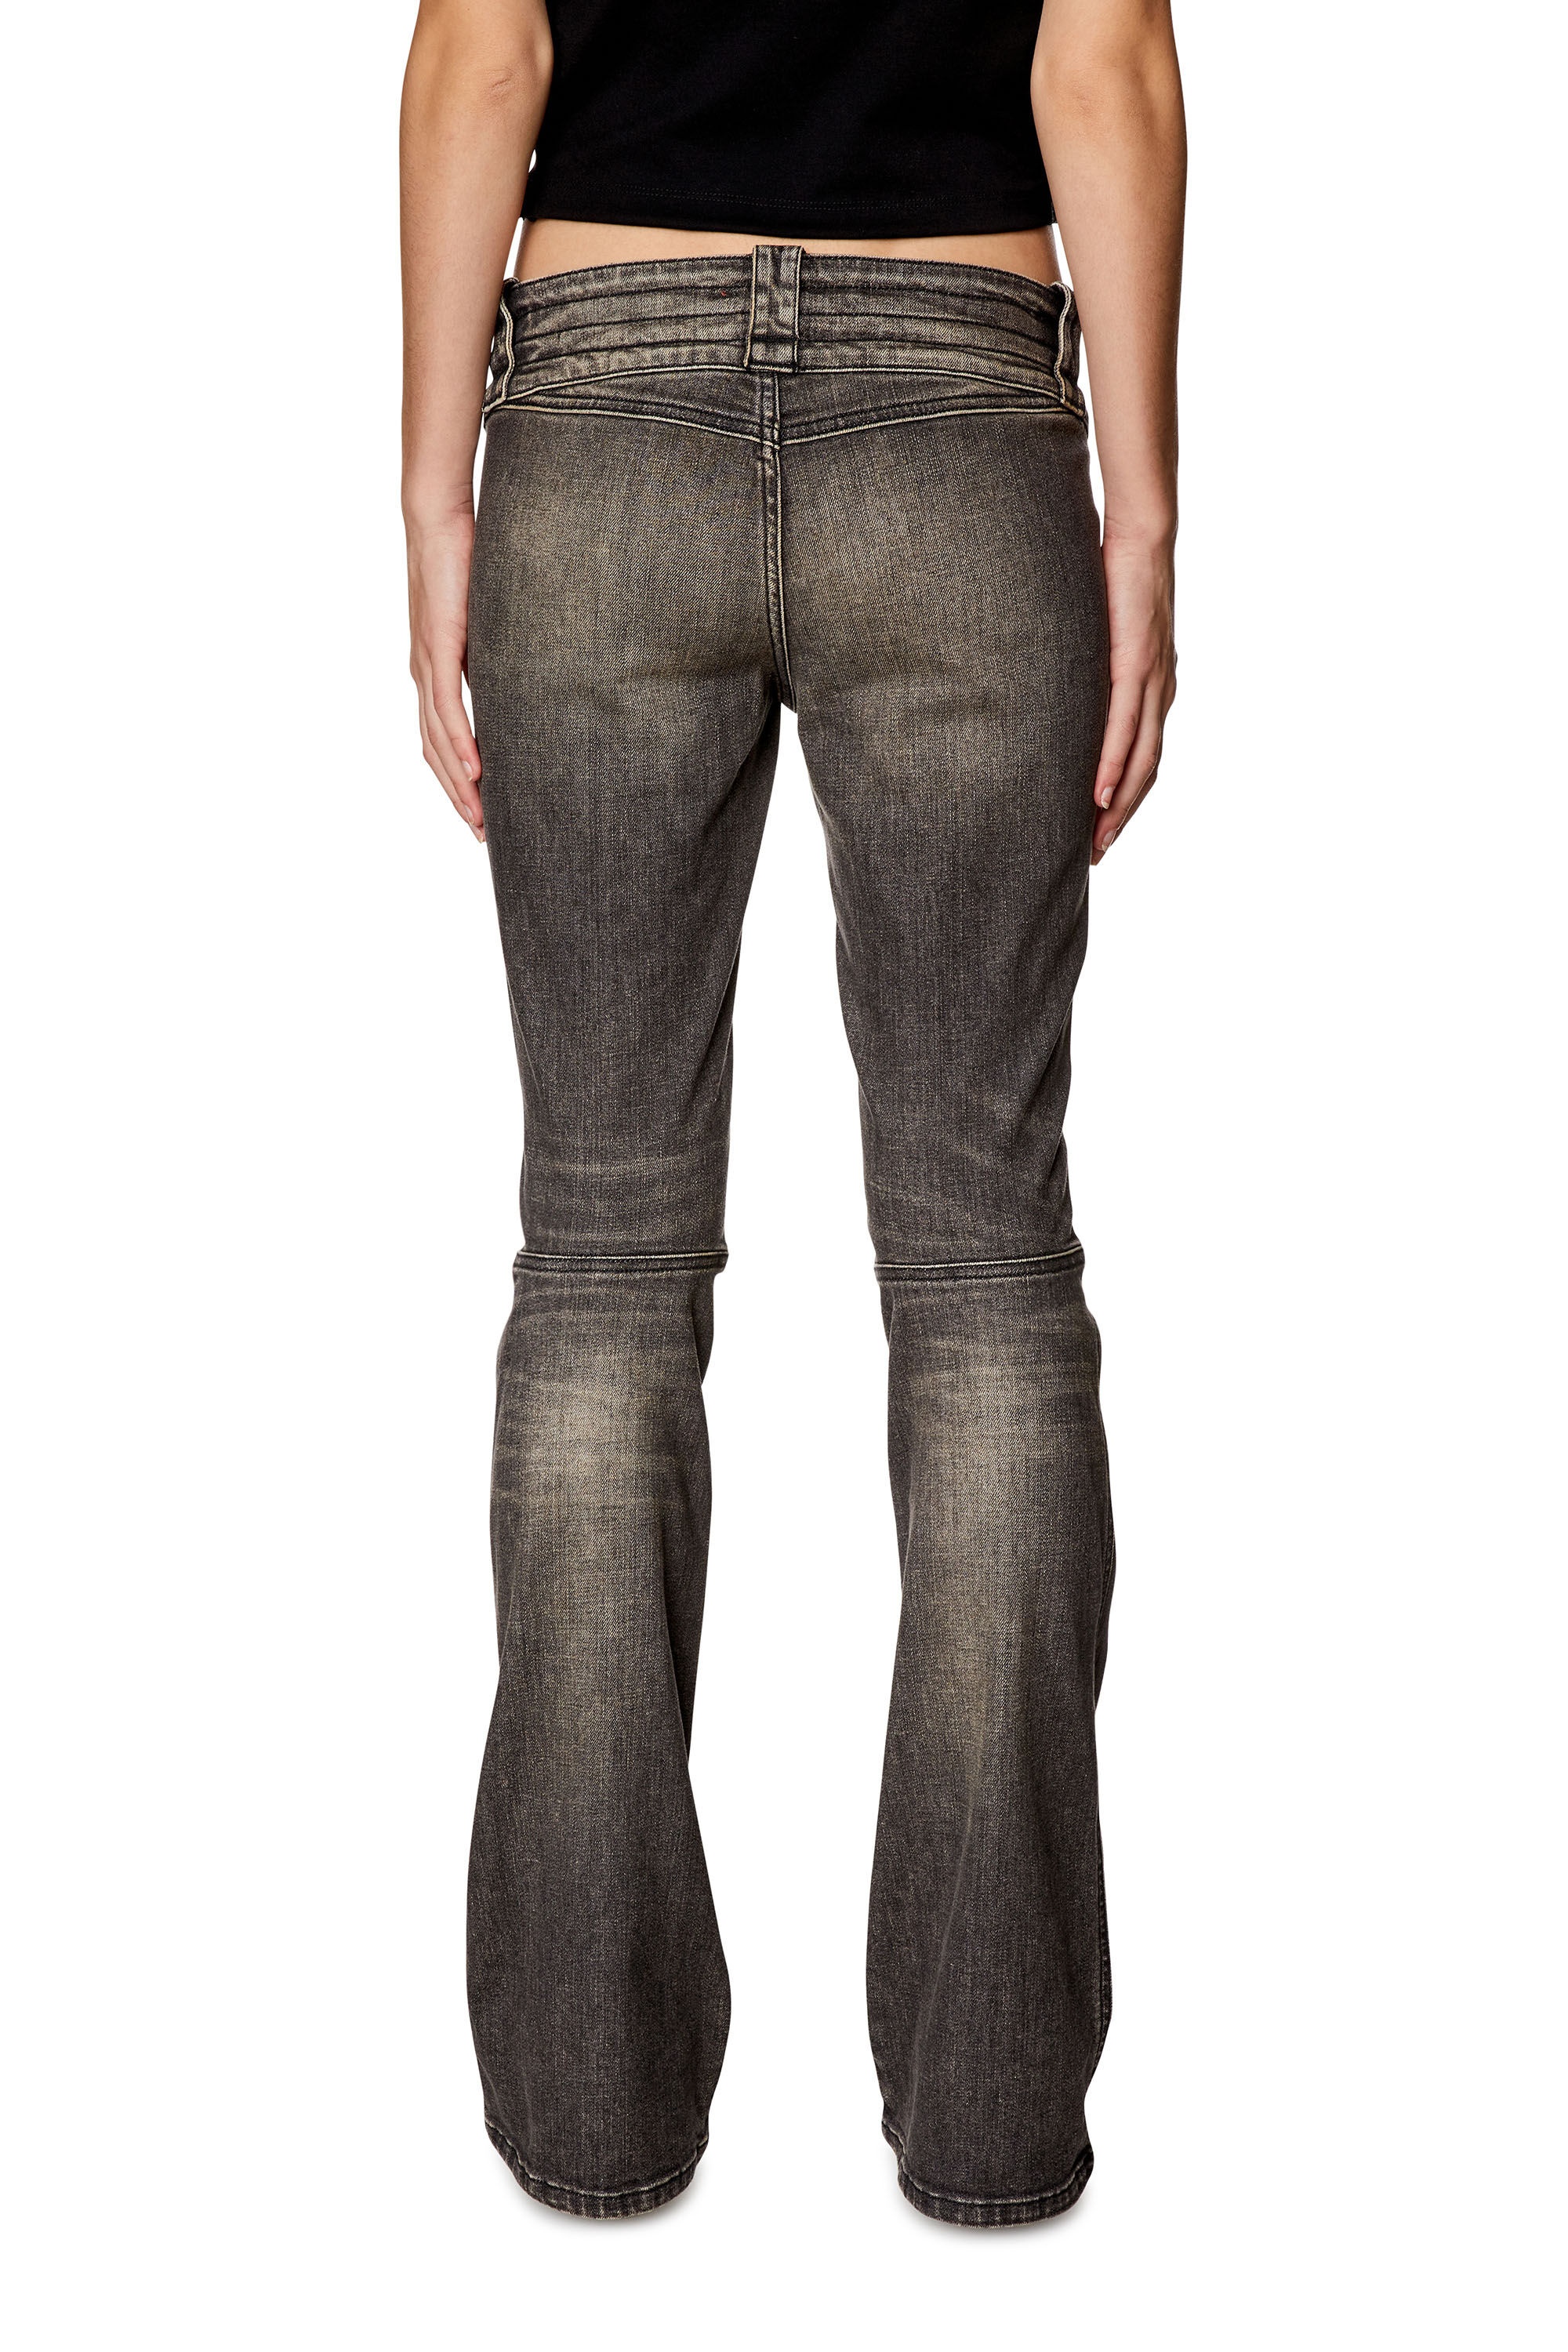 BOOTCUT AND FLARE JEANS BELTHY 0JGAL - 5